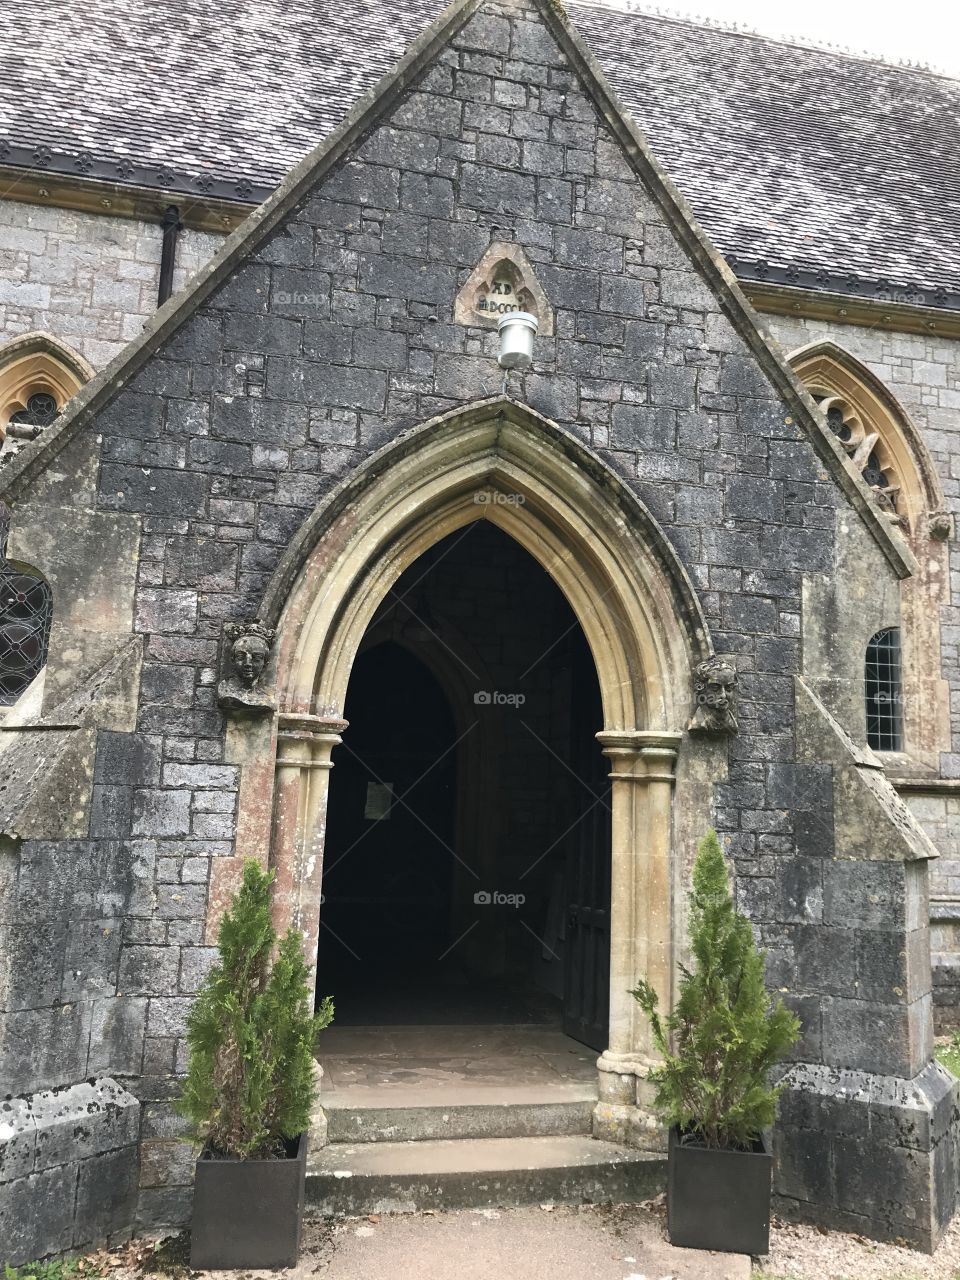 Entrance to St Mary Church in East Budleigh.